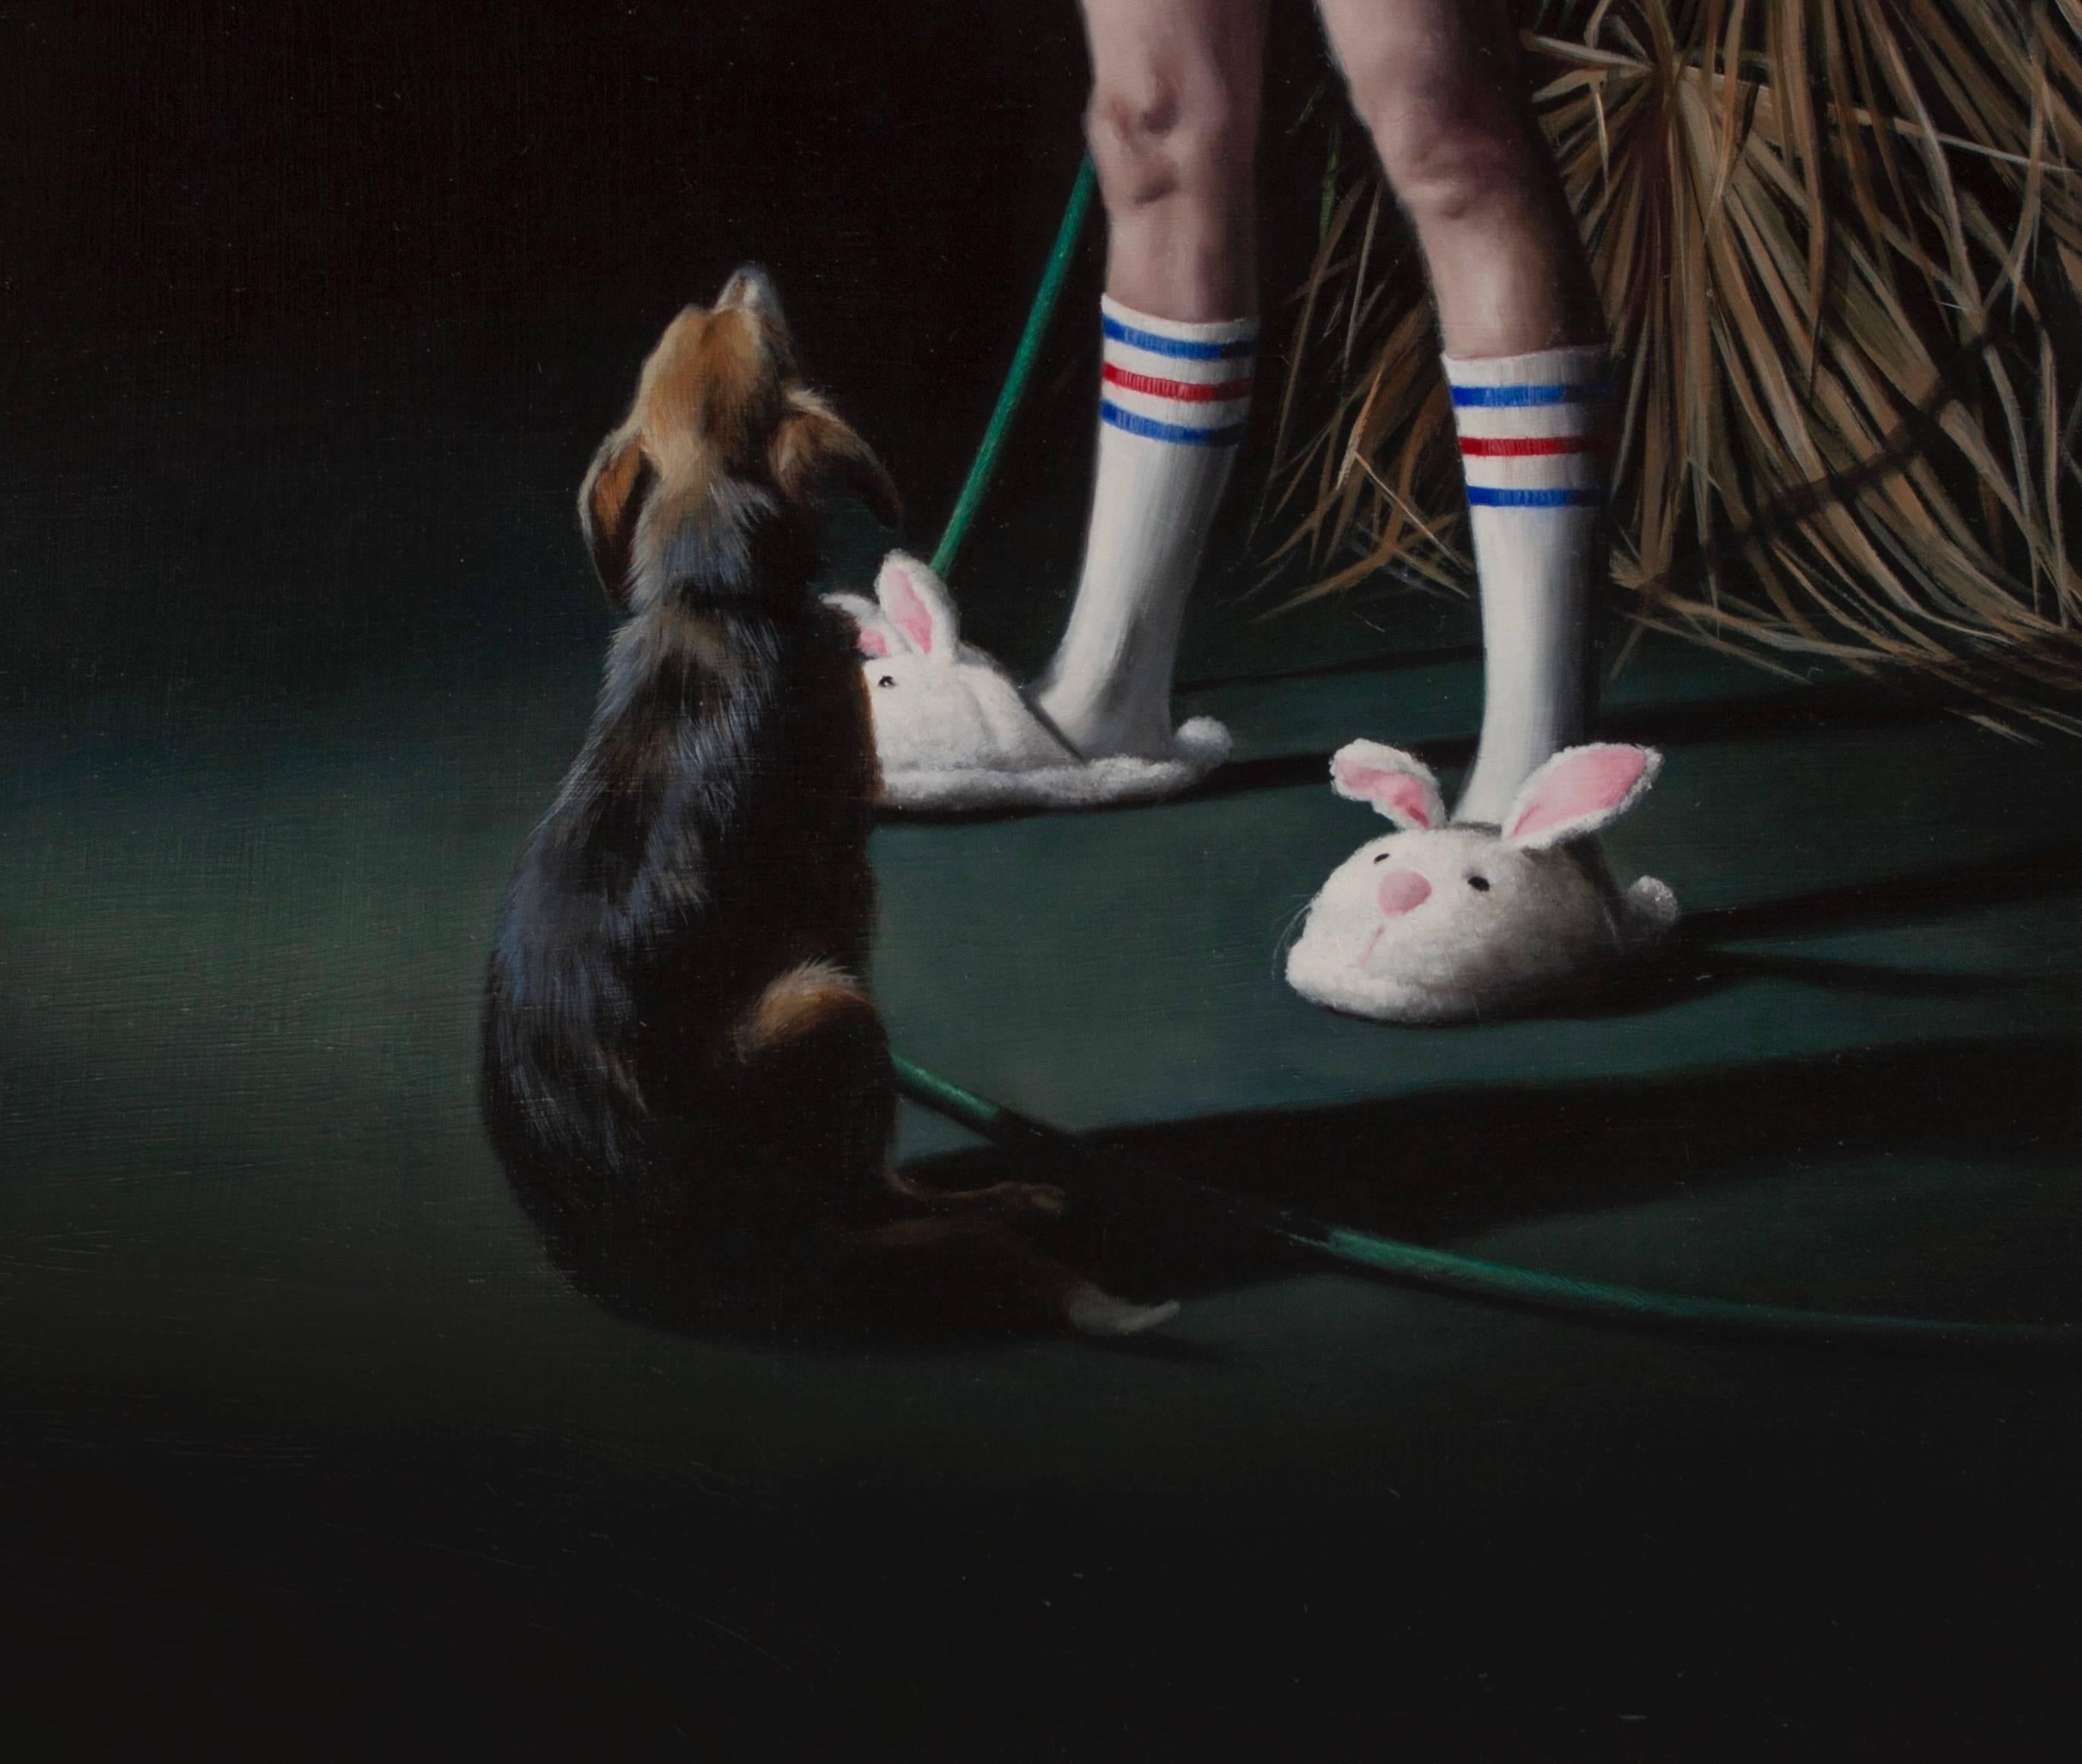 The Standoff - American Realist Painting by Rachel Moseley